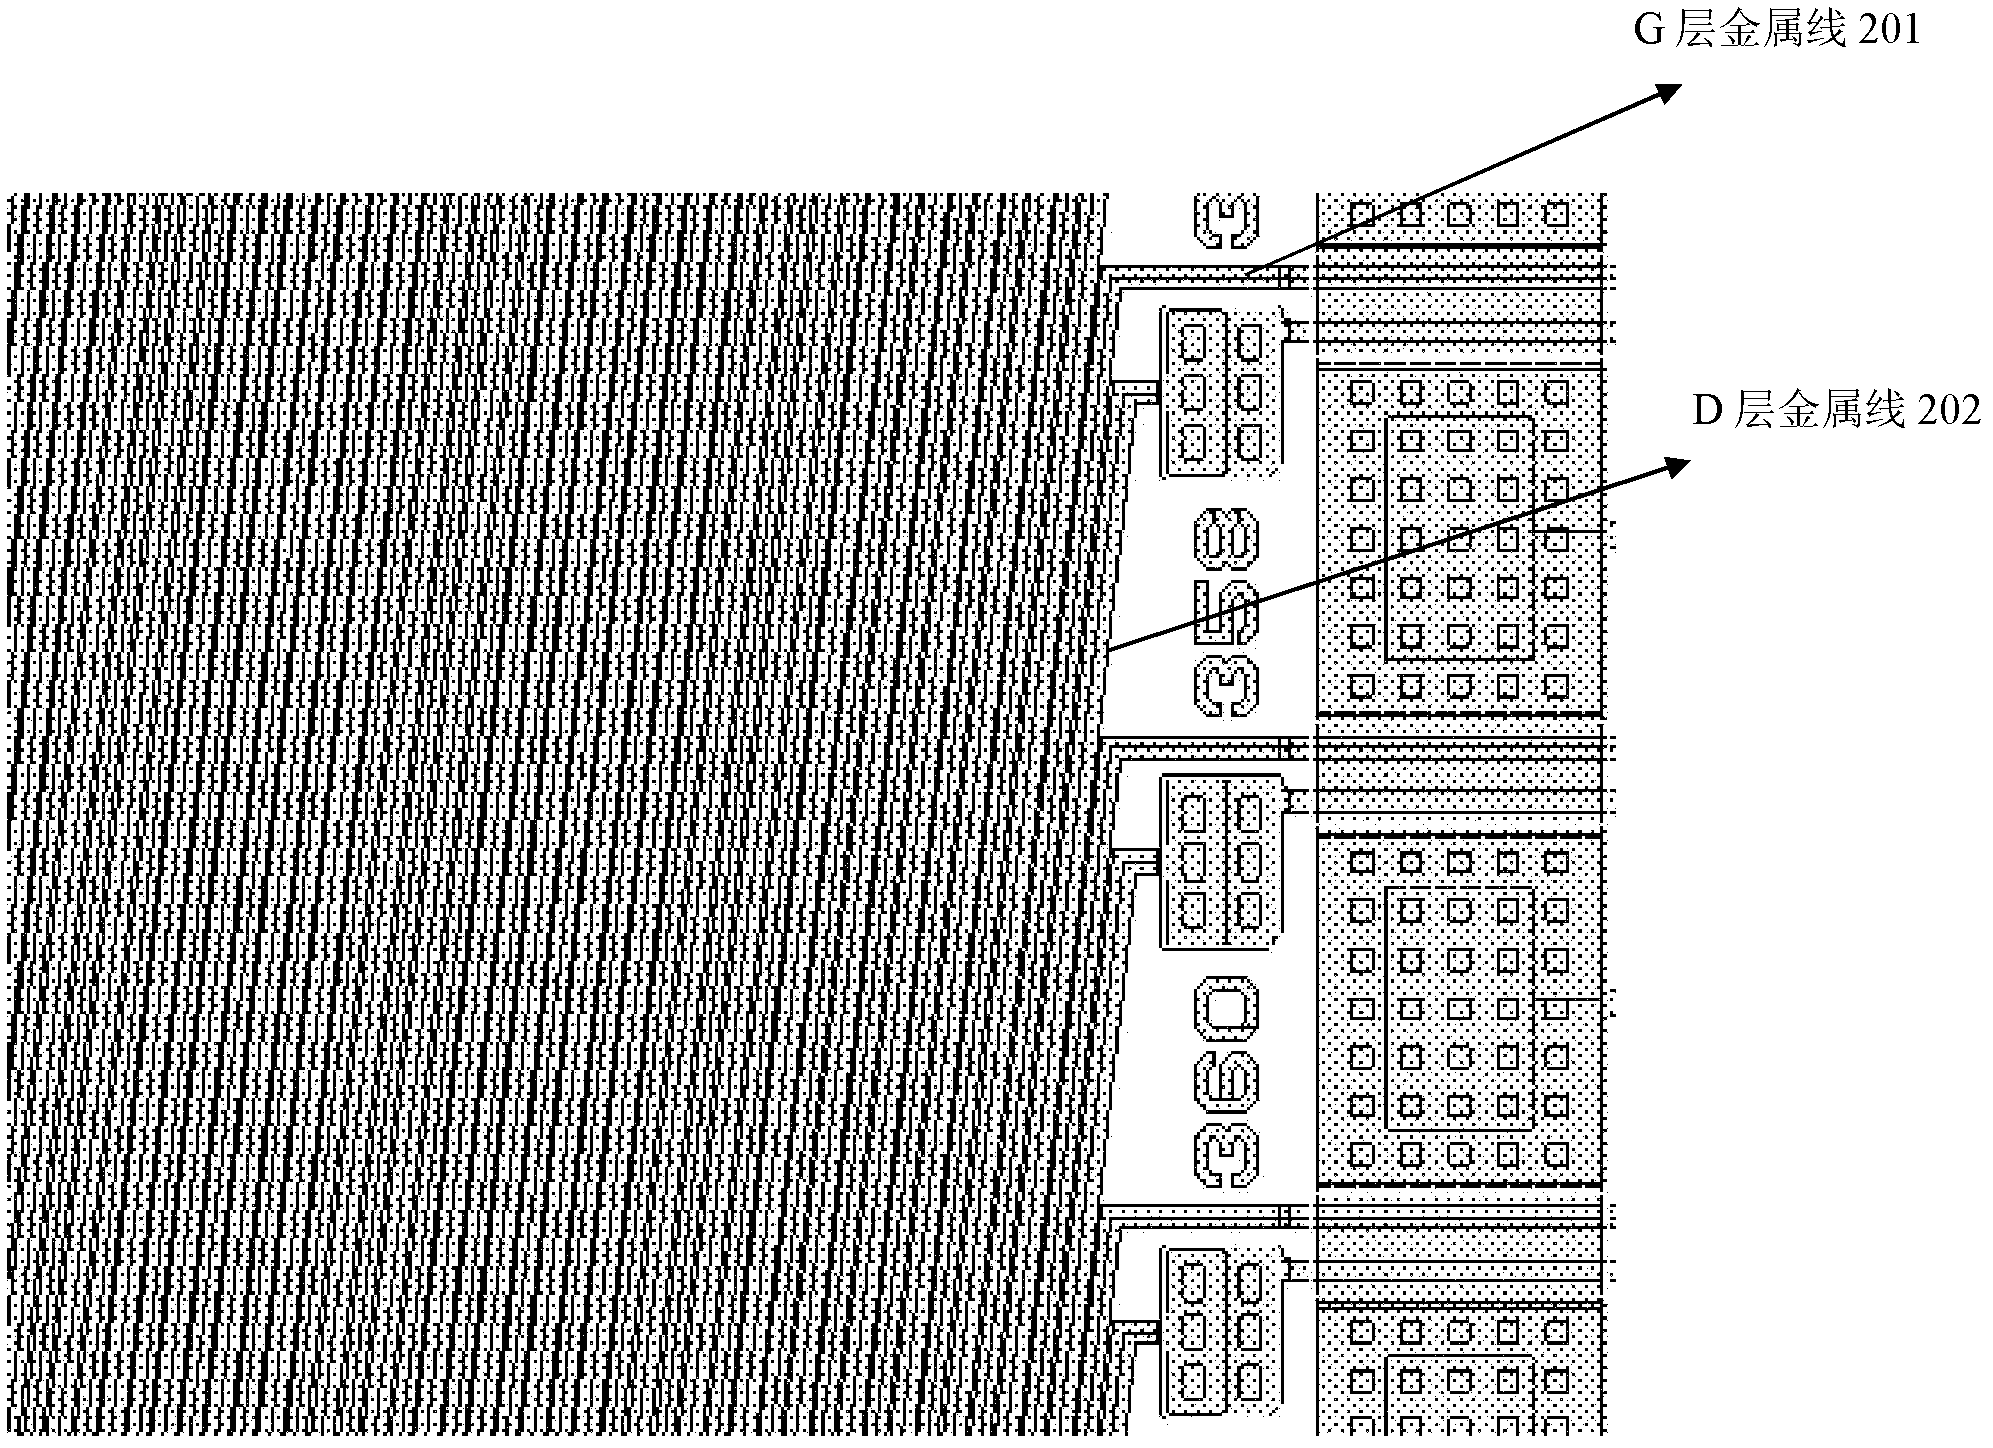 Array substrate of liquid crystal display and scanning line structure of array substrate